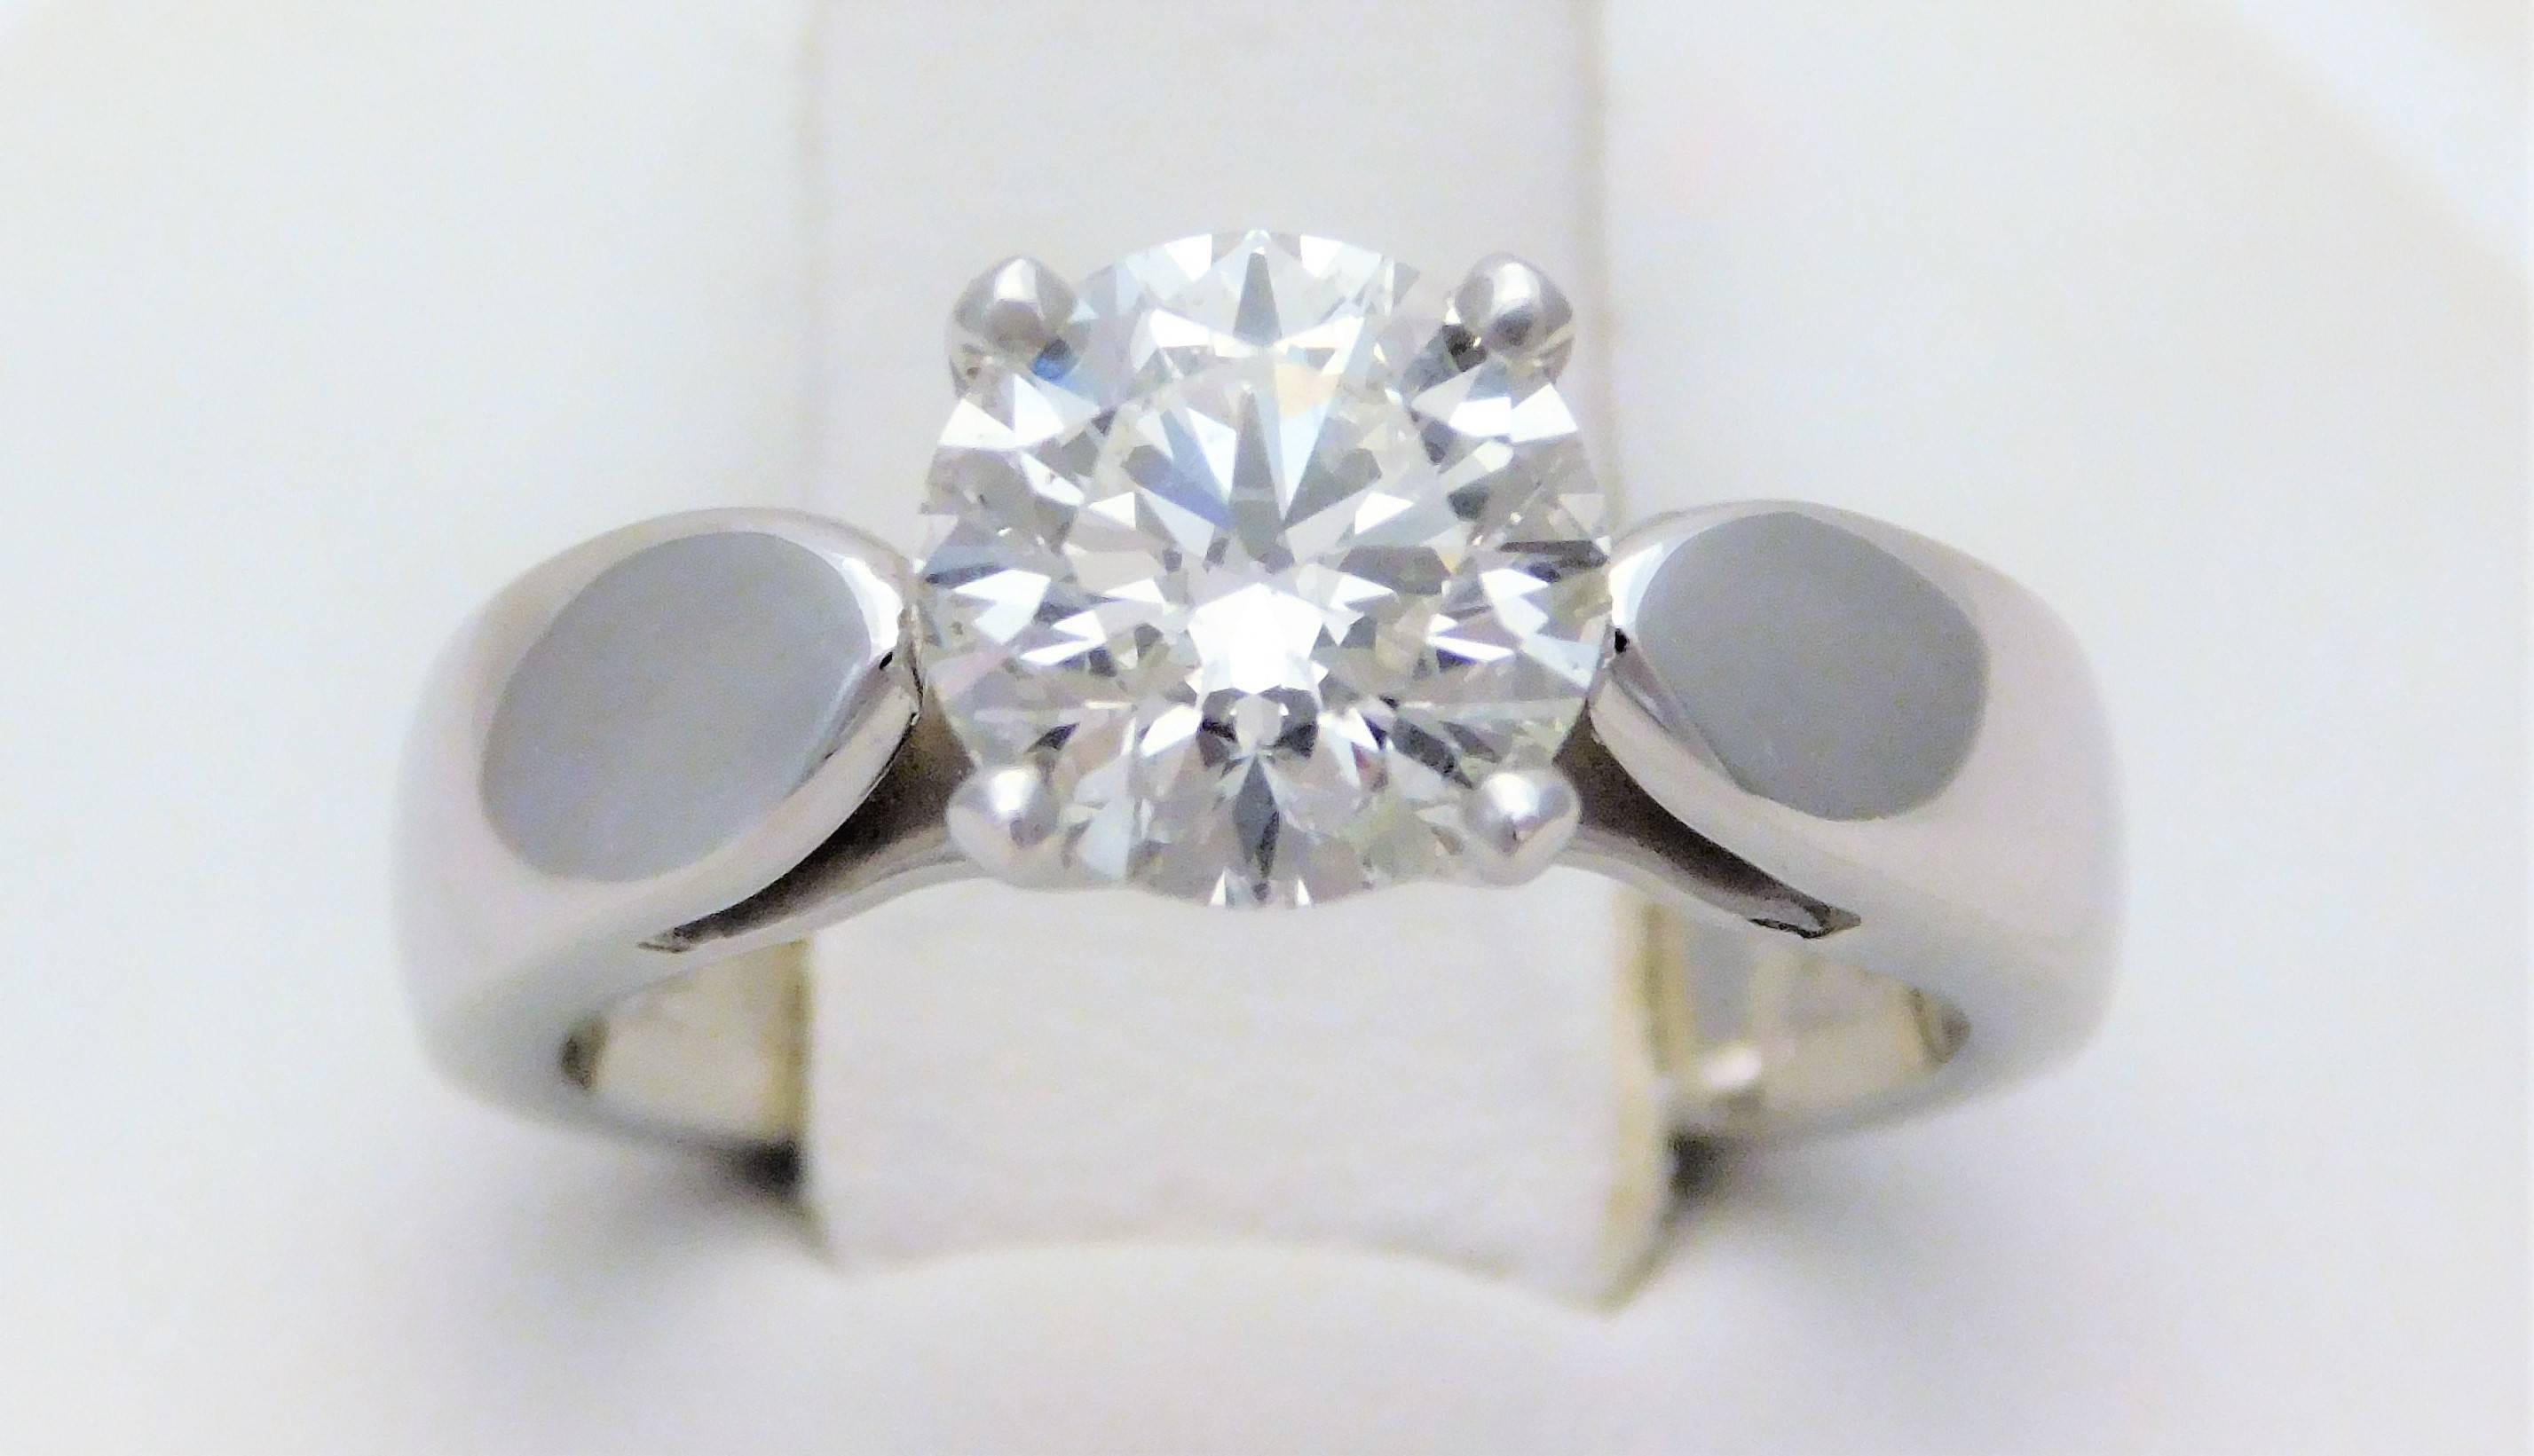 From a distinguished Southern estate.  Circa 2007.  This breathtaking solitaire engagement ring has been crafted in solid 14k White gold with a polished finish.  It has been masterfully jeweled with a GIA certified 1.28ct round brilliant-cut diamond